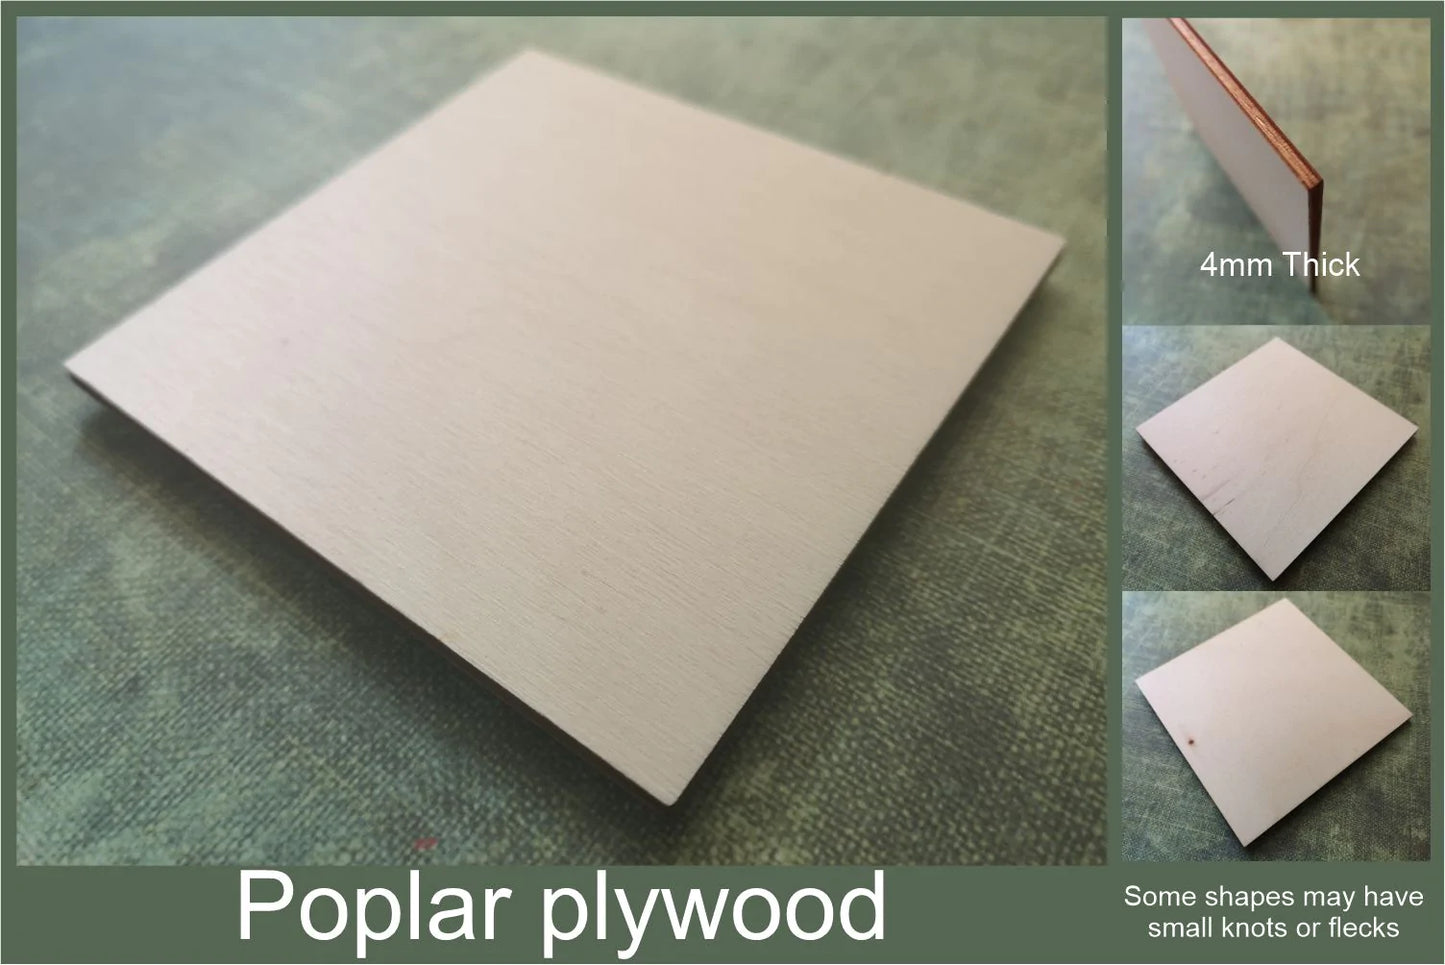 4mm thick poplar plywood used to make the Flower 6 petal cut-outs ready for crafting